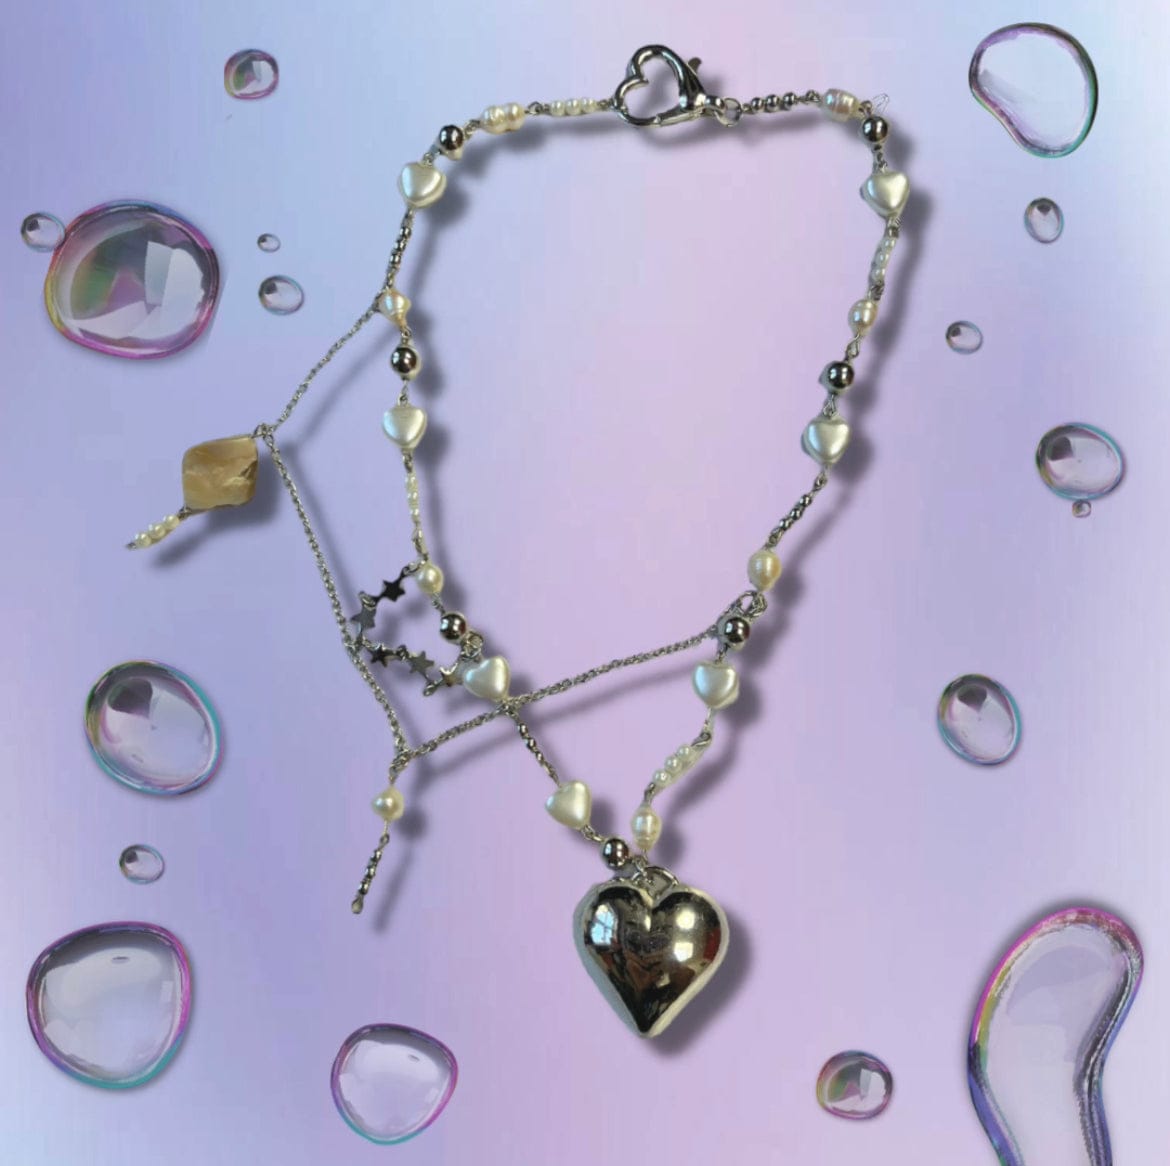 This 19 inch beaded necklace has pearl bubble hearts, pearl beads and silver balls. They are all connected by silver plated copper. Across the necklace is a chain with mother of pearl, pearls, and various silver and pearl beads. In between the layers there is a star chain. The pendant is a silver heart. Thé necklace is connected with a heart shaped clasp.